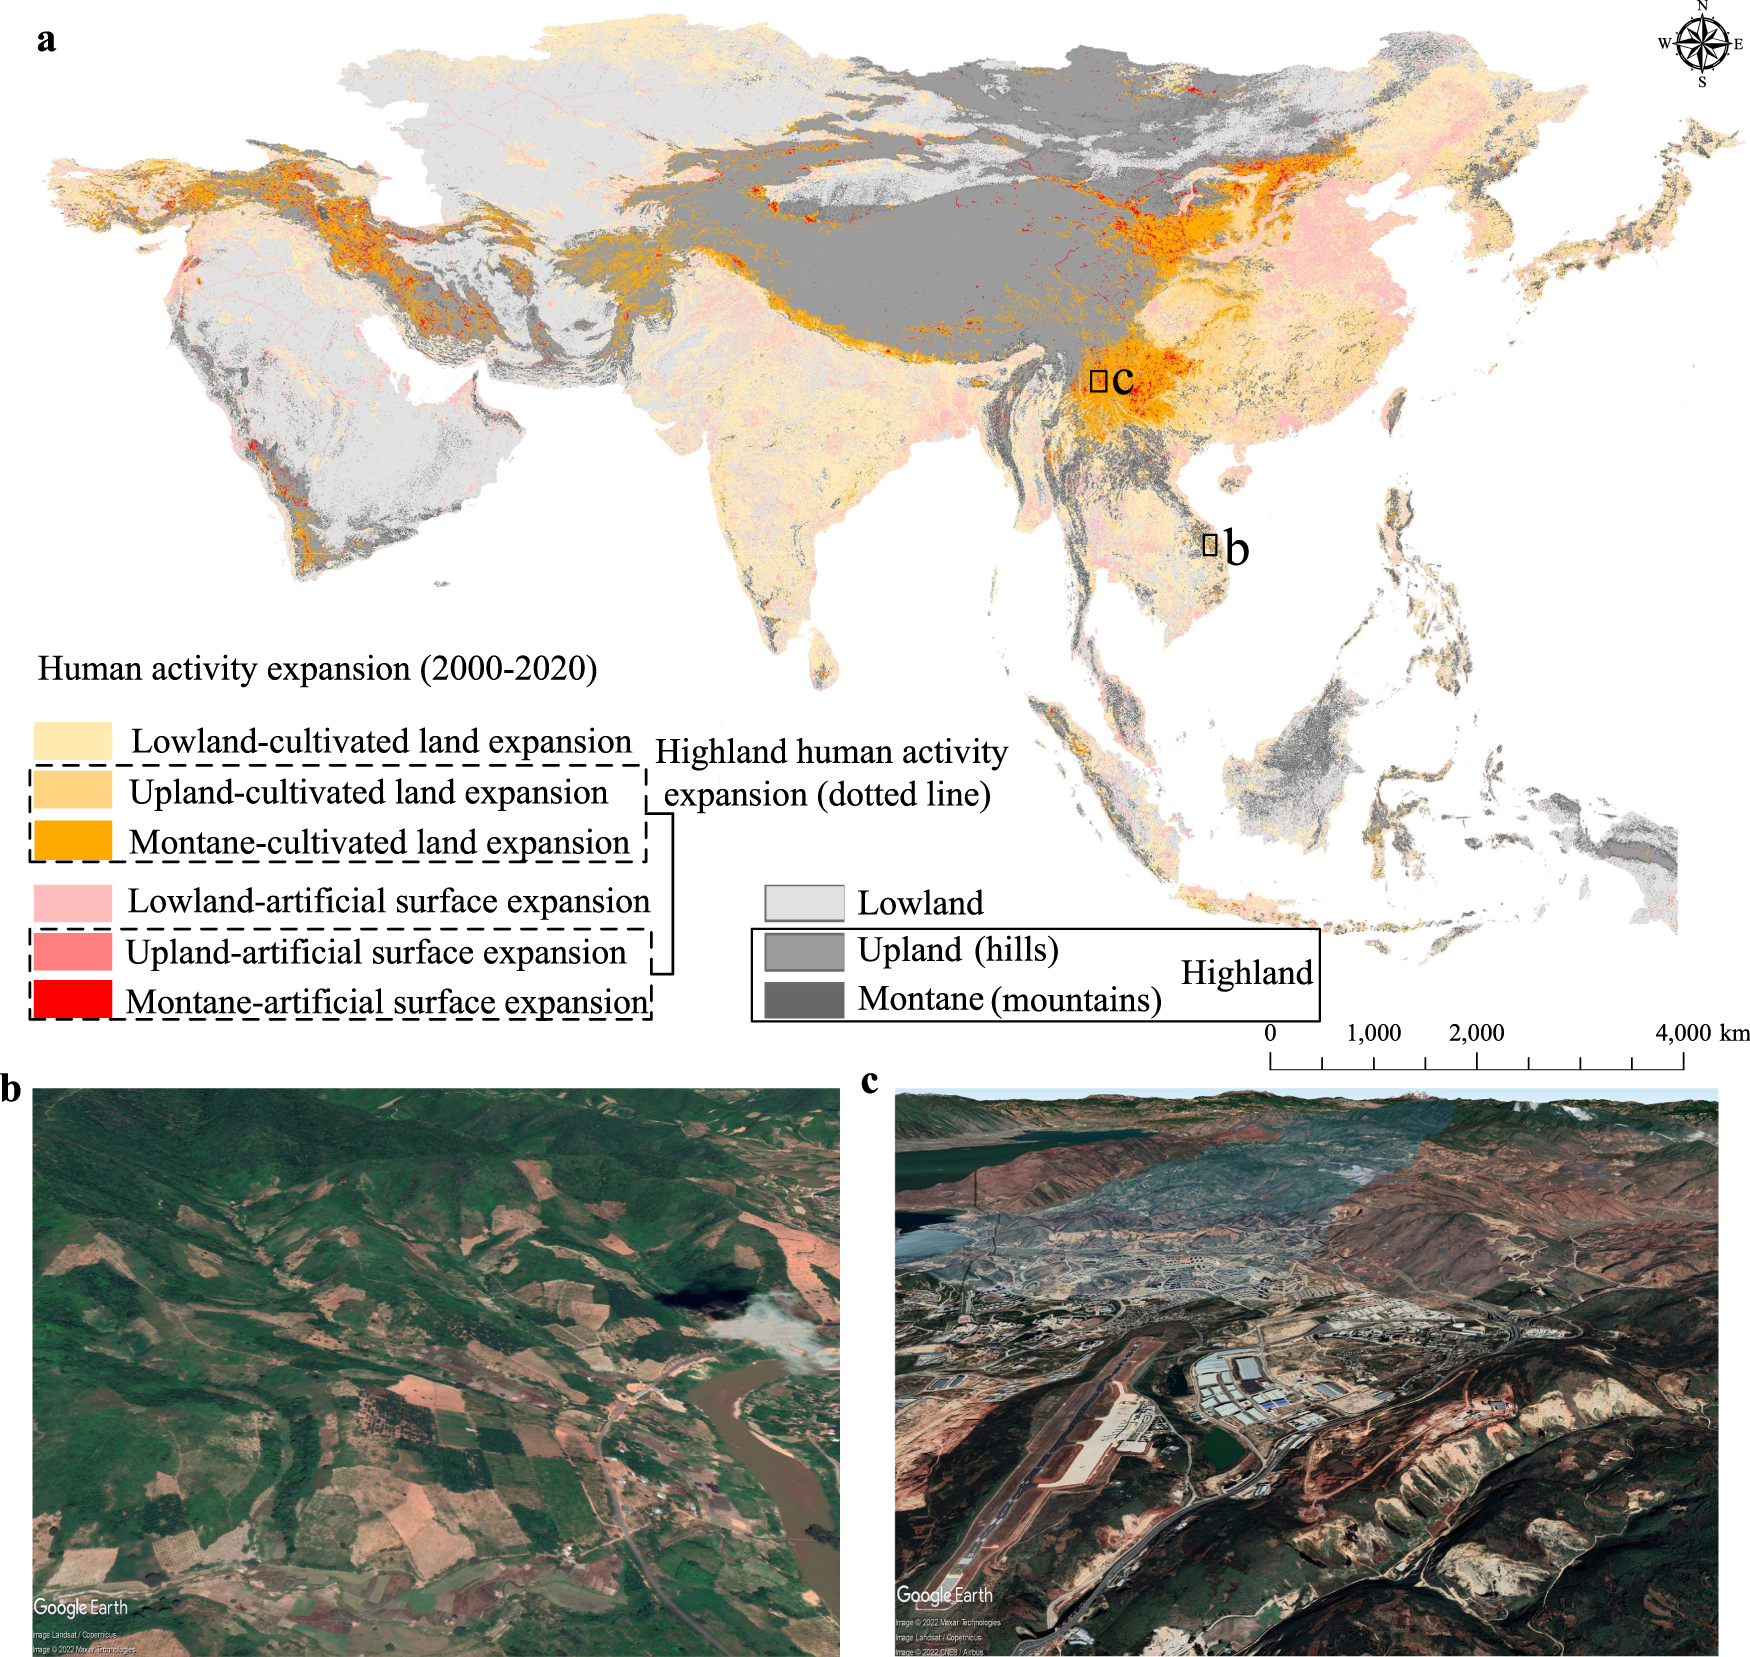 Human expansion into Asian highlands in the 21st Century and its effects |  Nature Communications